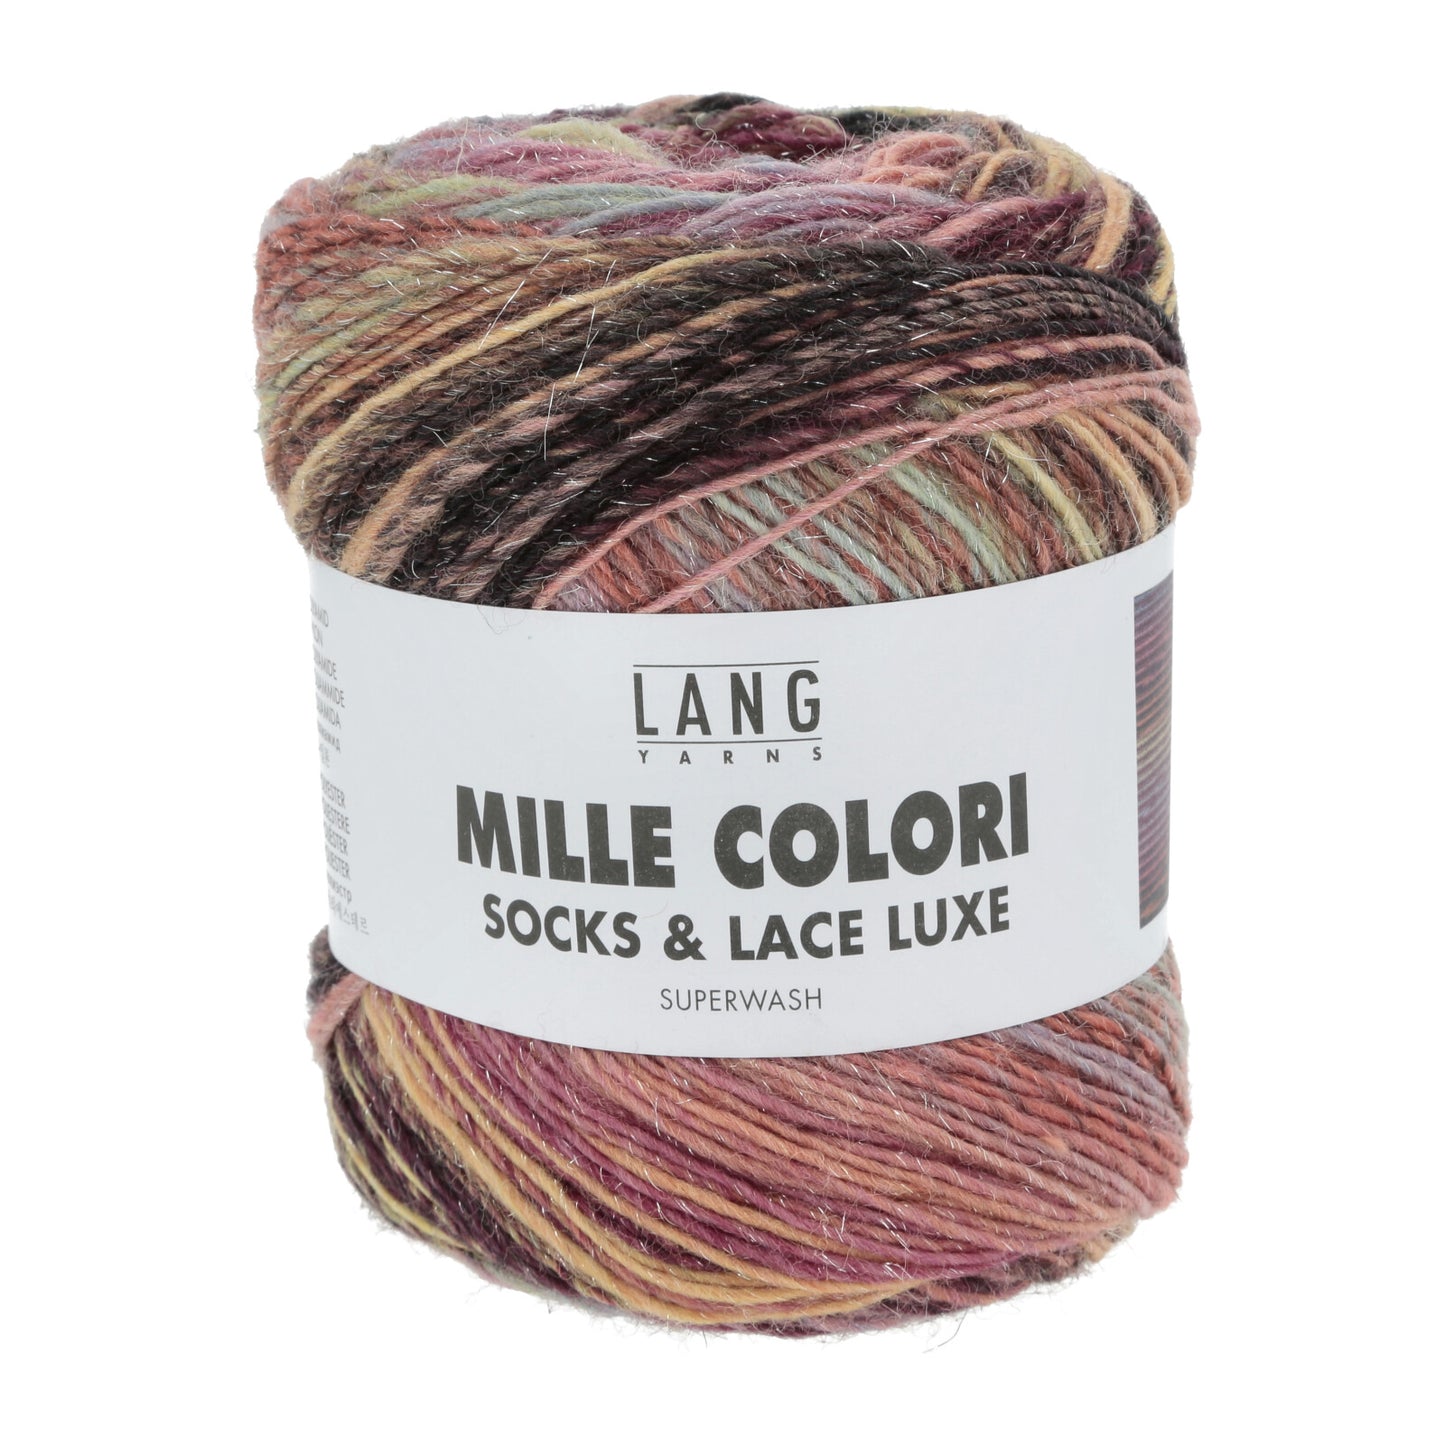 Mille Colori Socks & Lace Luxe | Lang Yarns